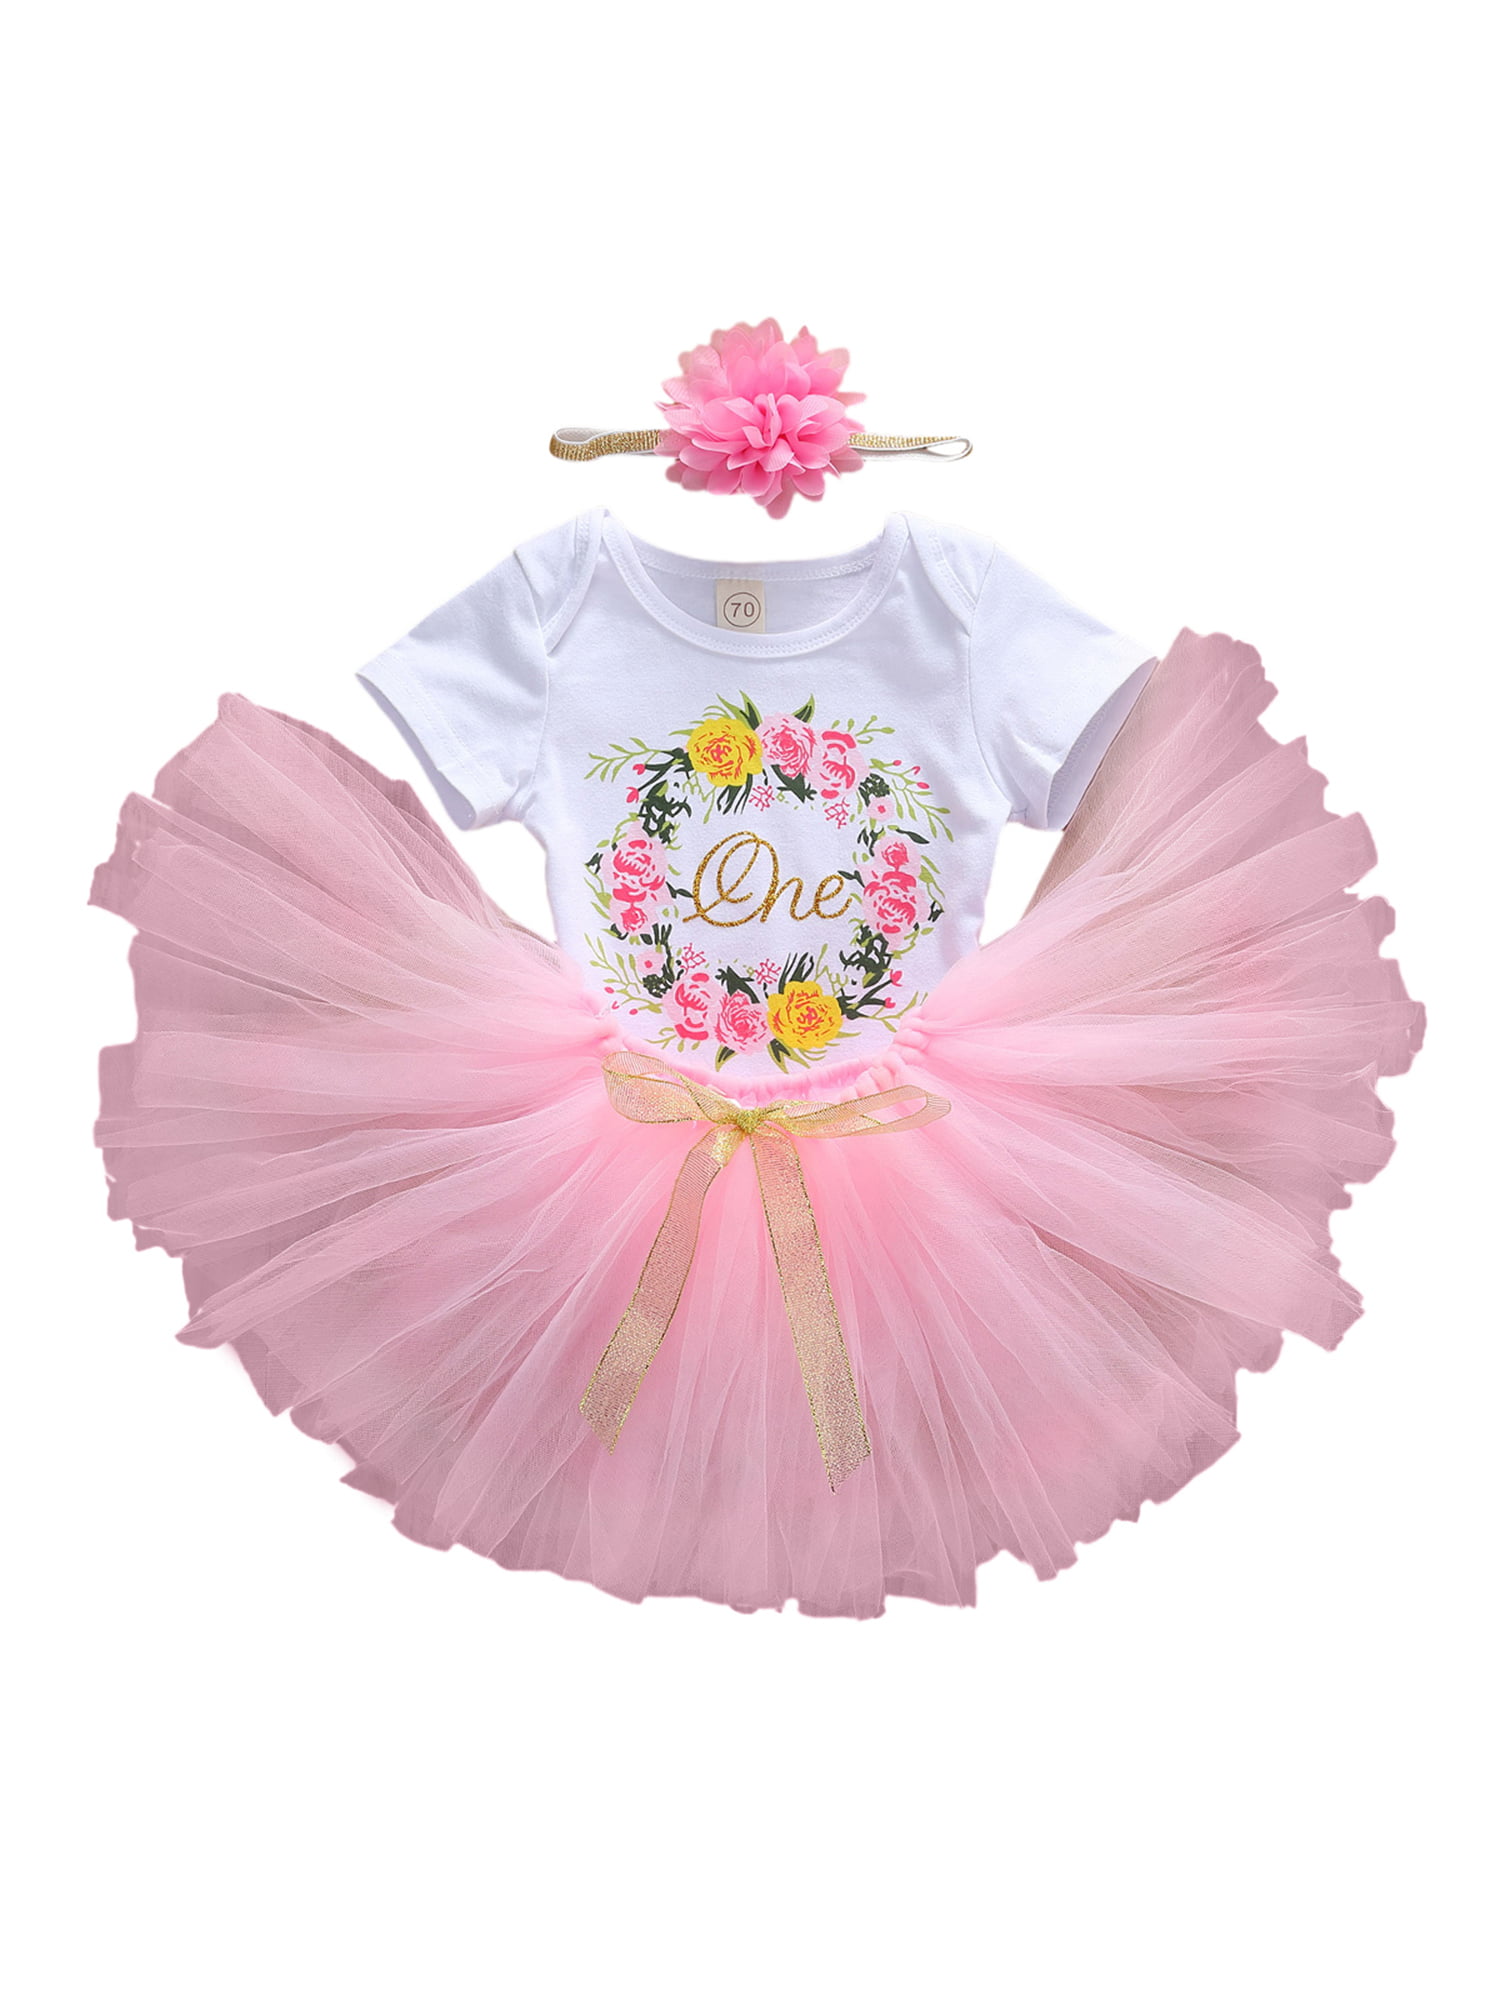 Baby Kids Girls Minnie Swing Tulle Tutu Dress Birthday Party Skirt Outfits Set 